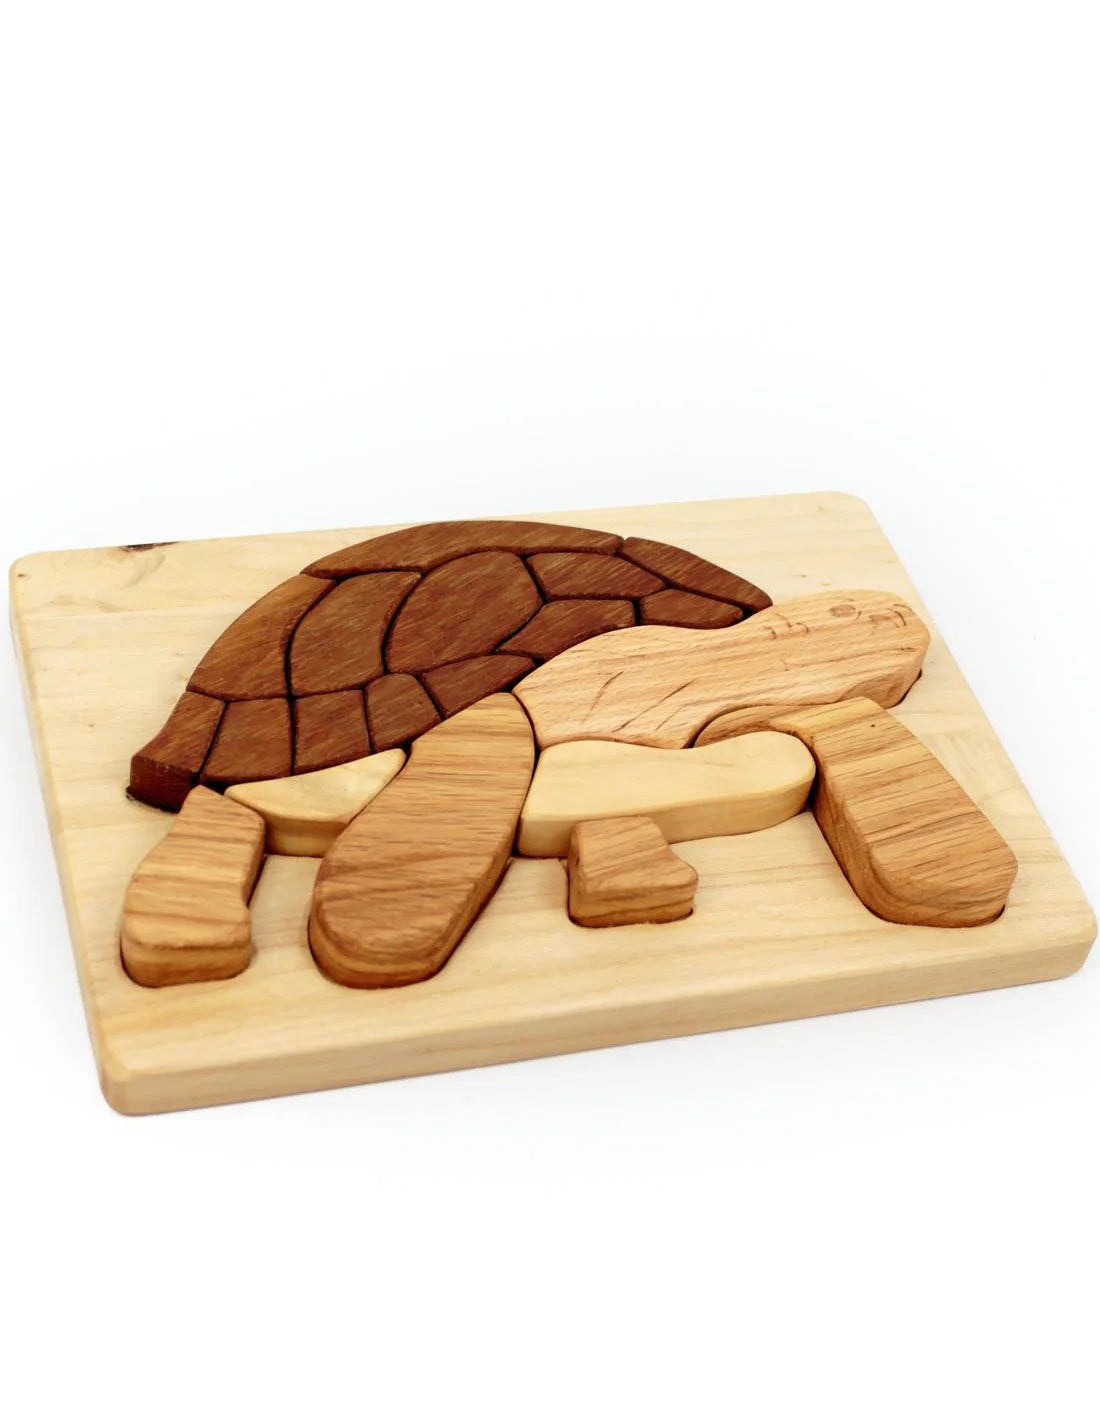 Turtle / Tortoise Wooden Puzzle in Natural Wood